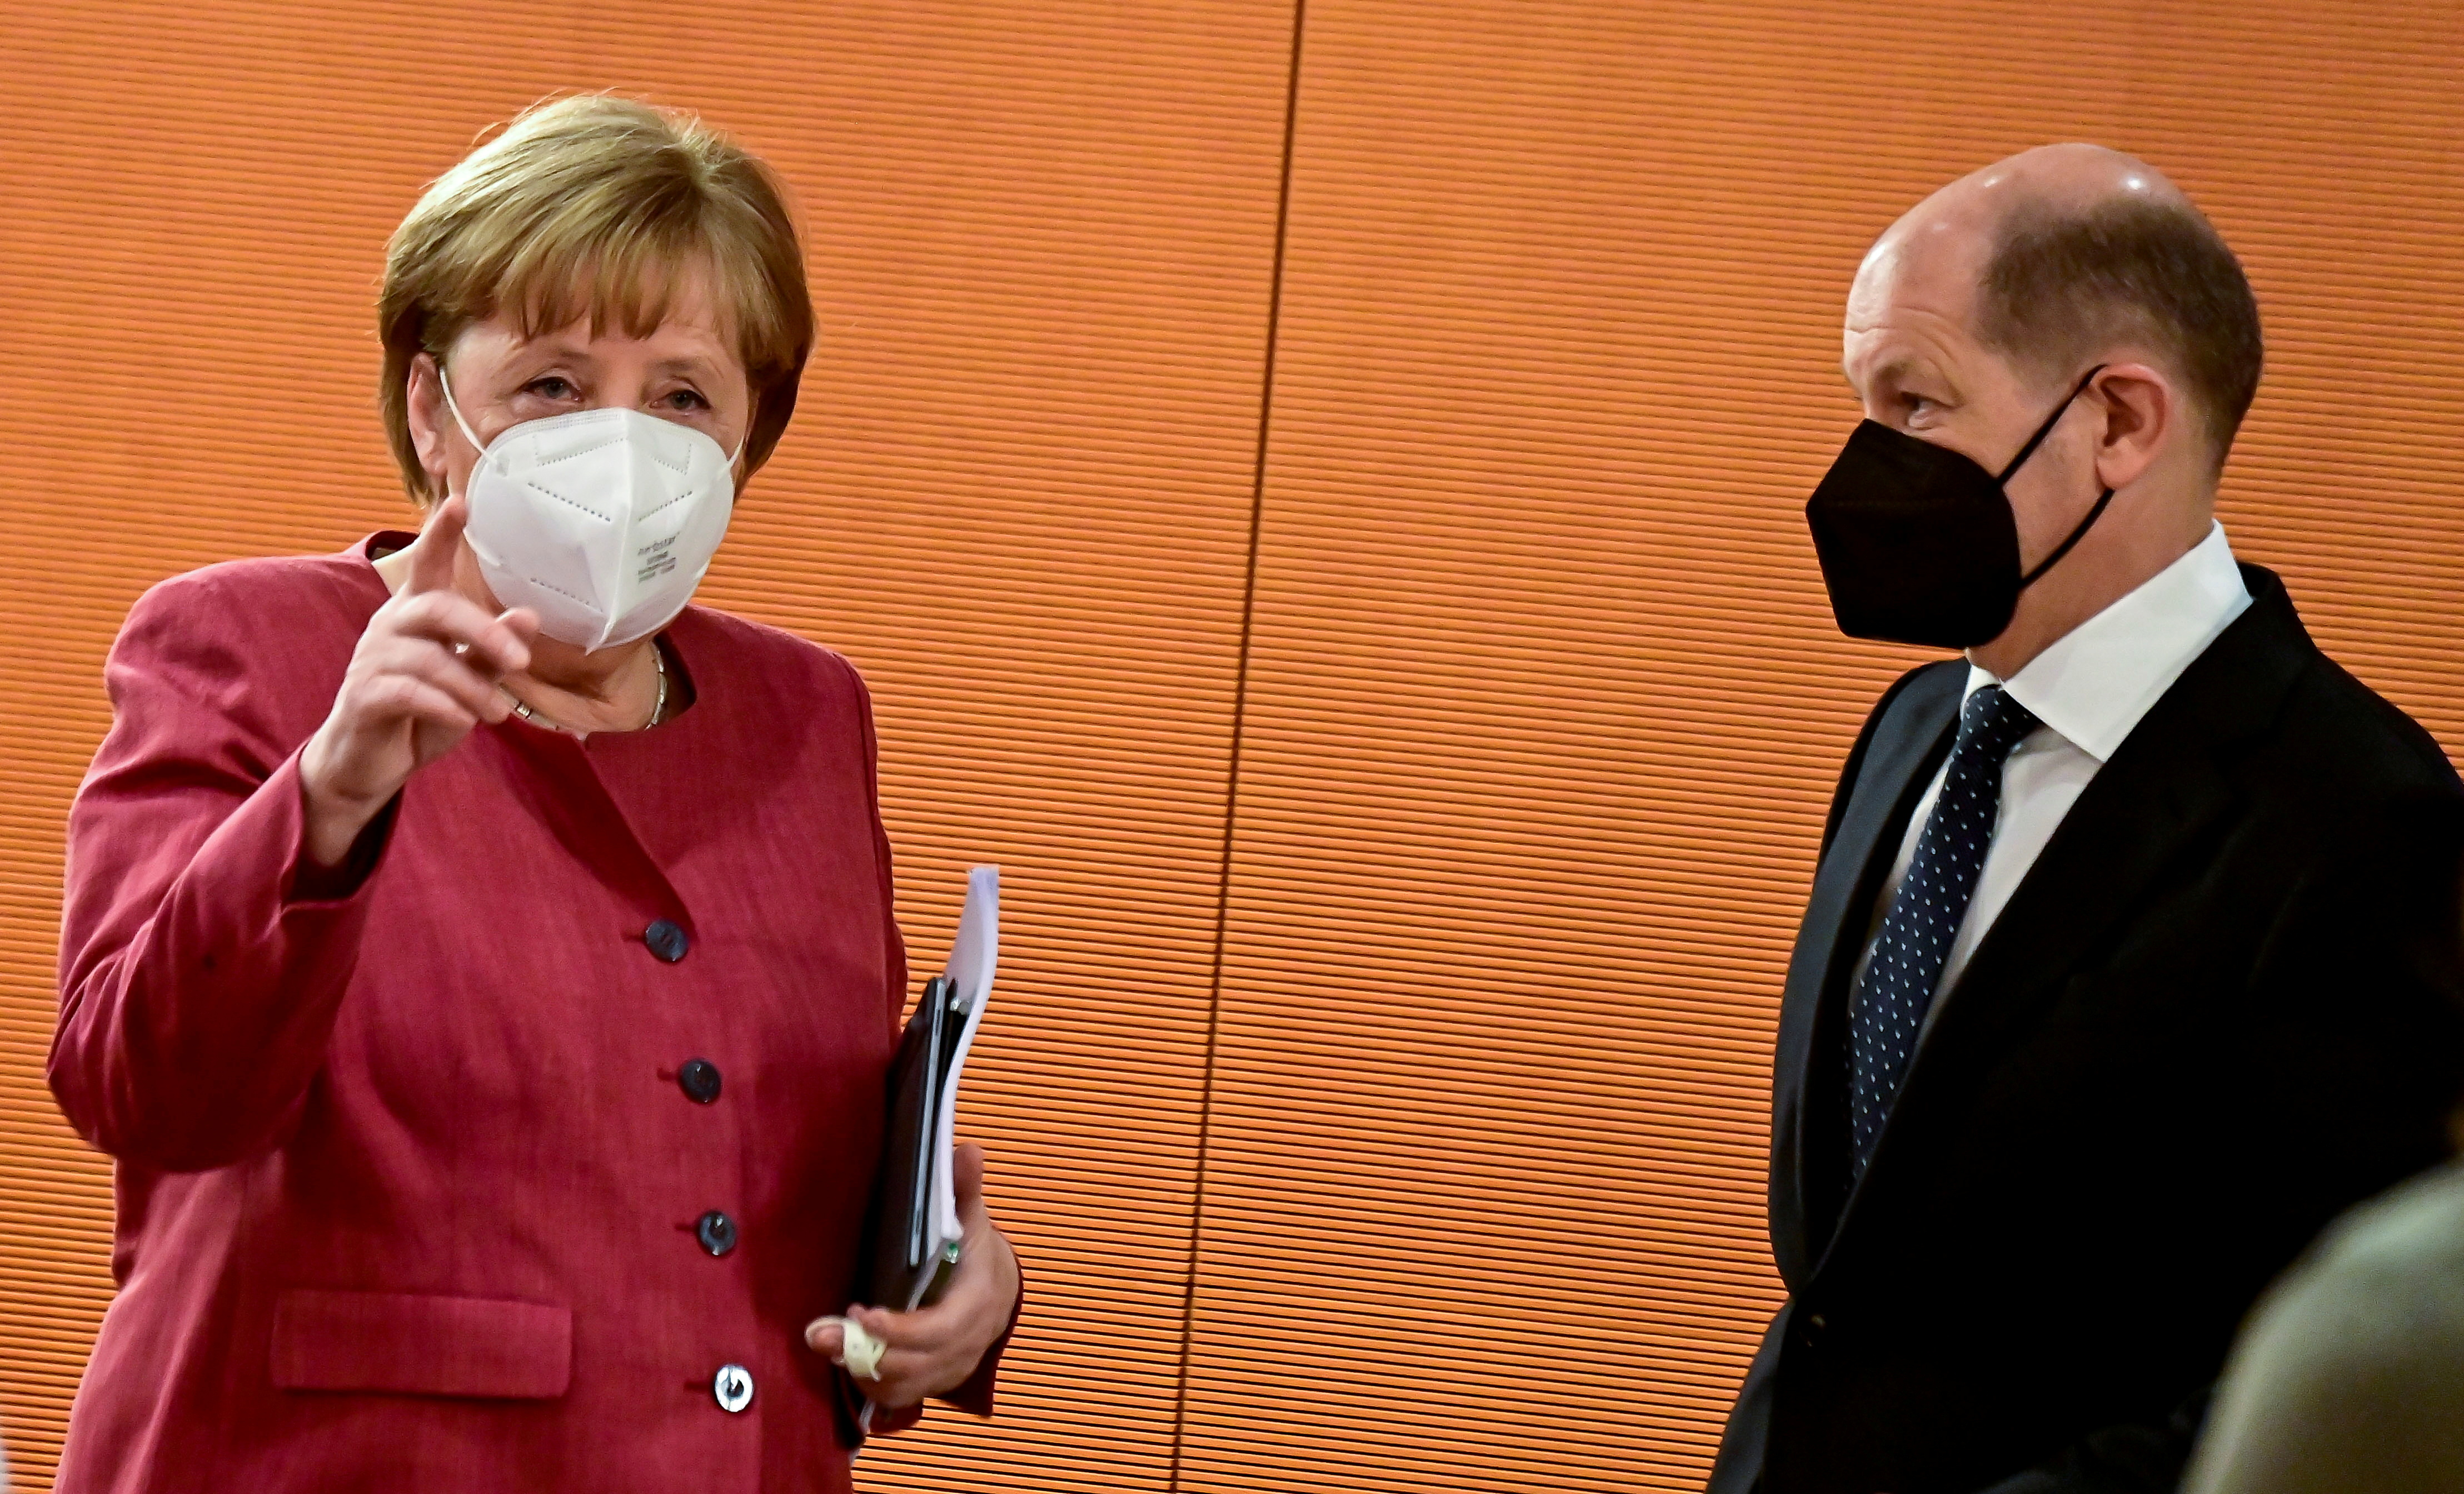 German Chancellor Angela Merkel and Finance Minister and Vice-Chancellor Olaf Scholz arrive for the weekly cabinet meeting at the Chancellery in Berlin, Germany April 21, 2021. Tobias Schwarz/Pool via REUTERS/File Photo